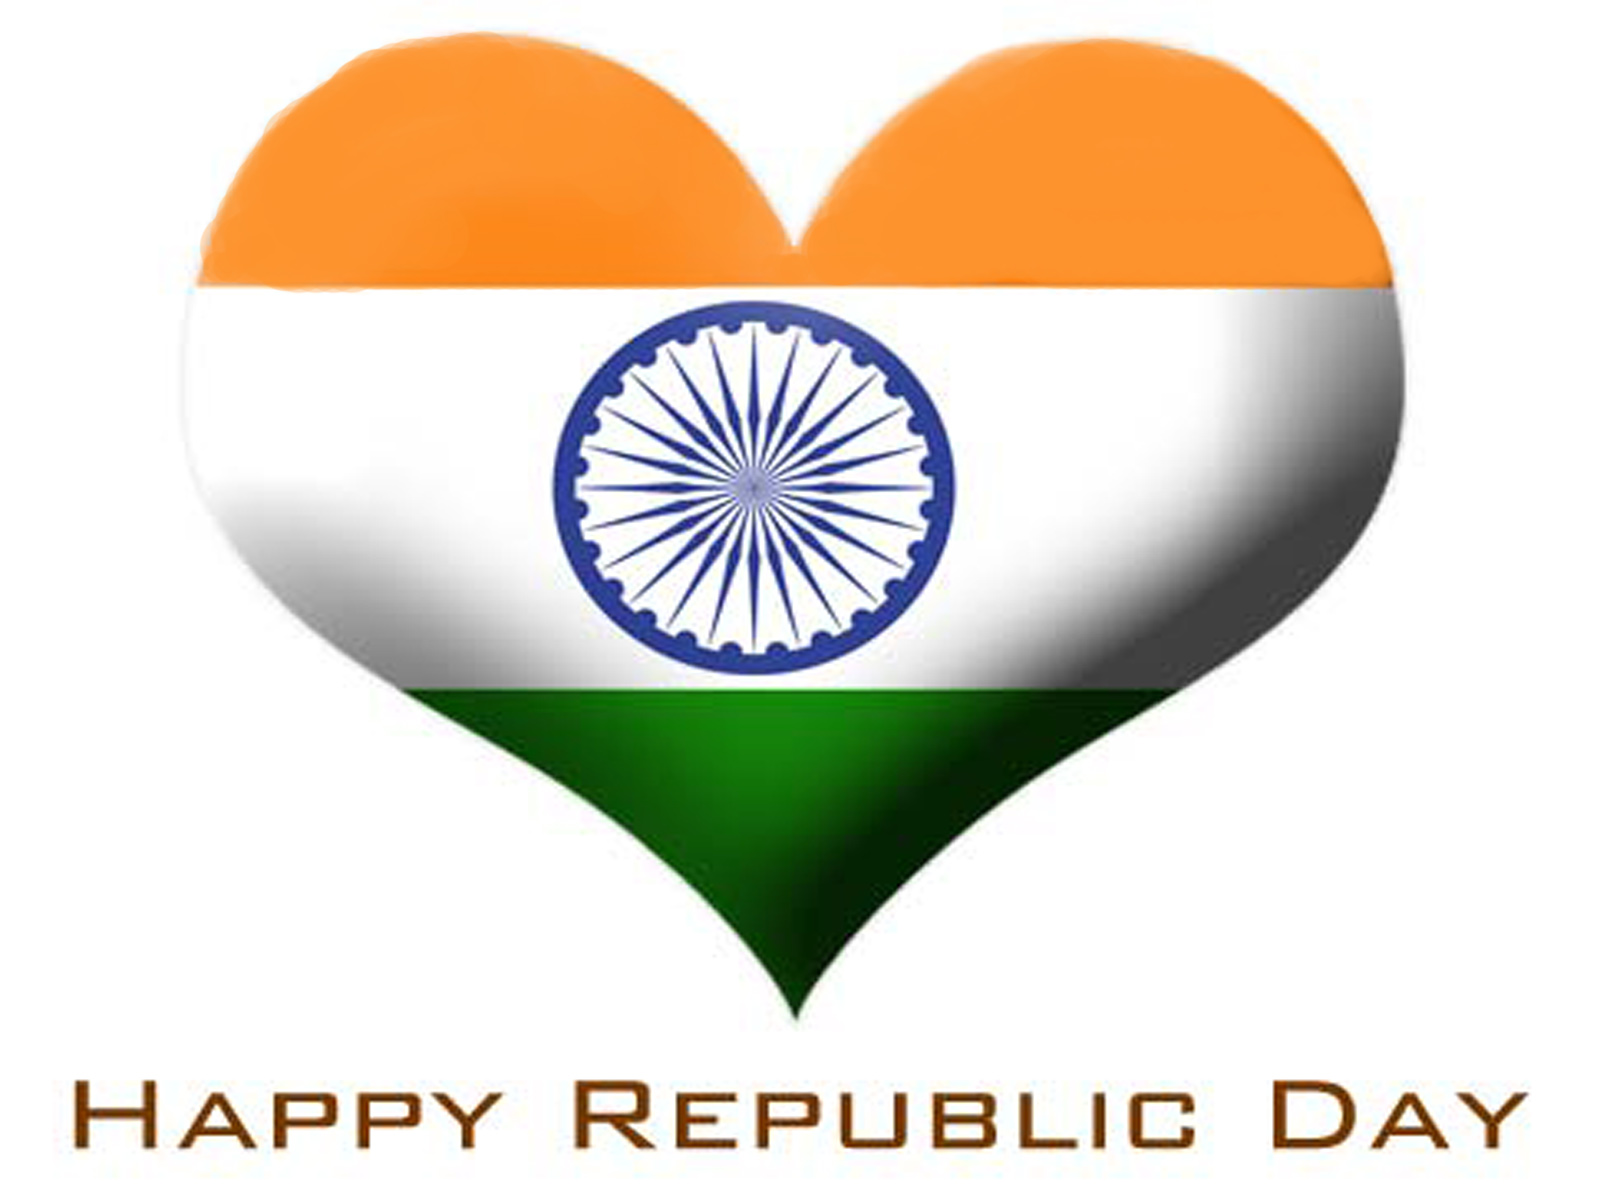 Indian Flag Wallpaper For Mobile - Republic Day , HD Wallpaper & Backgrounds